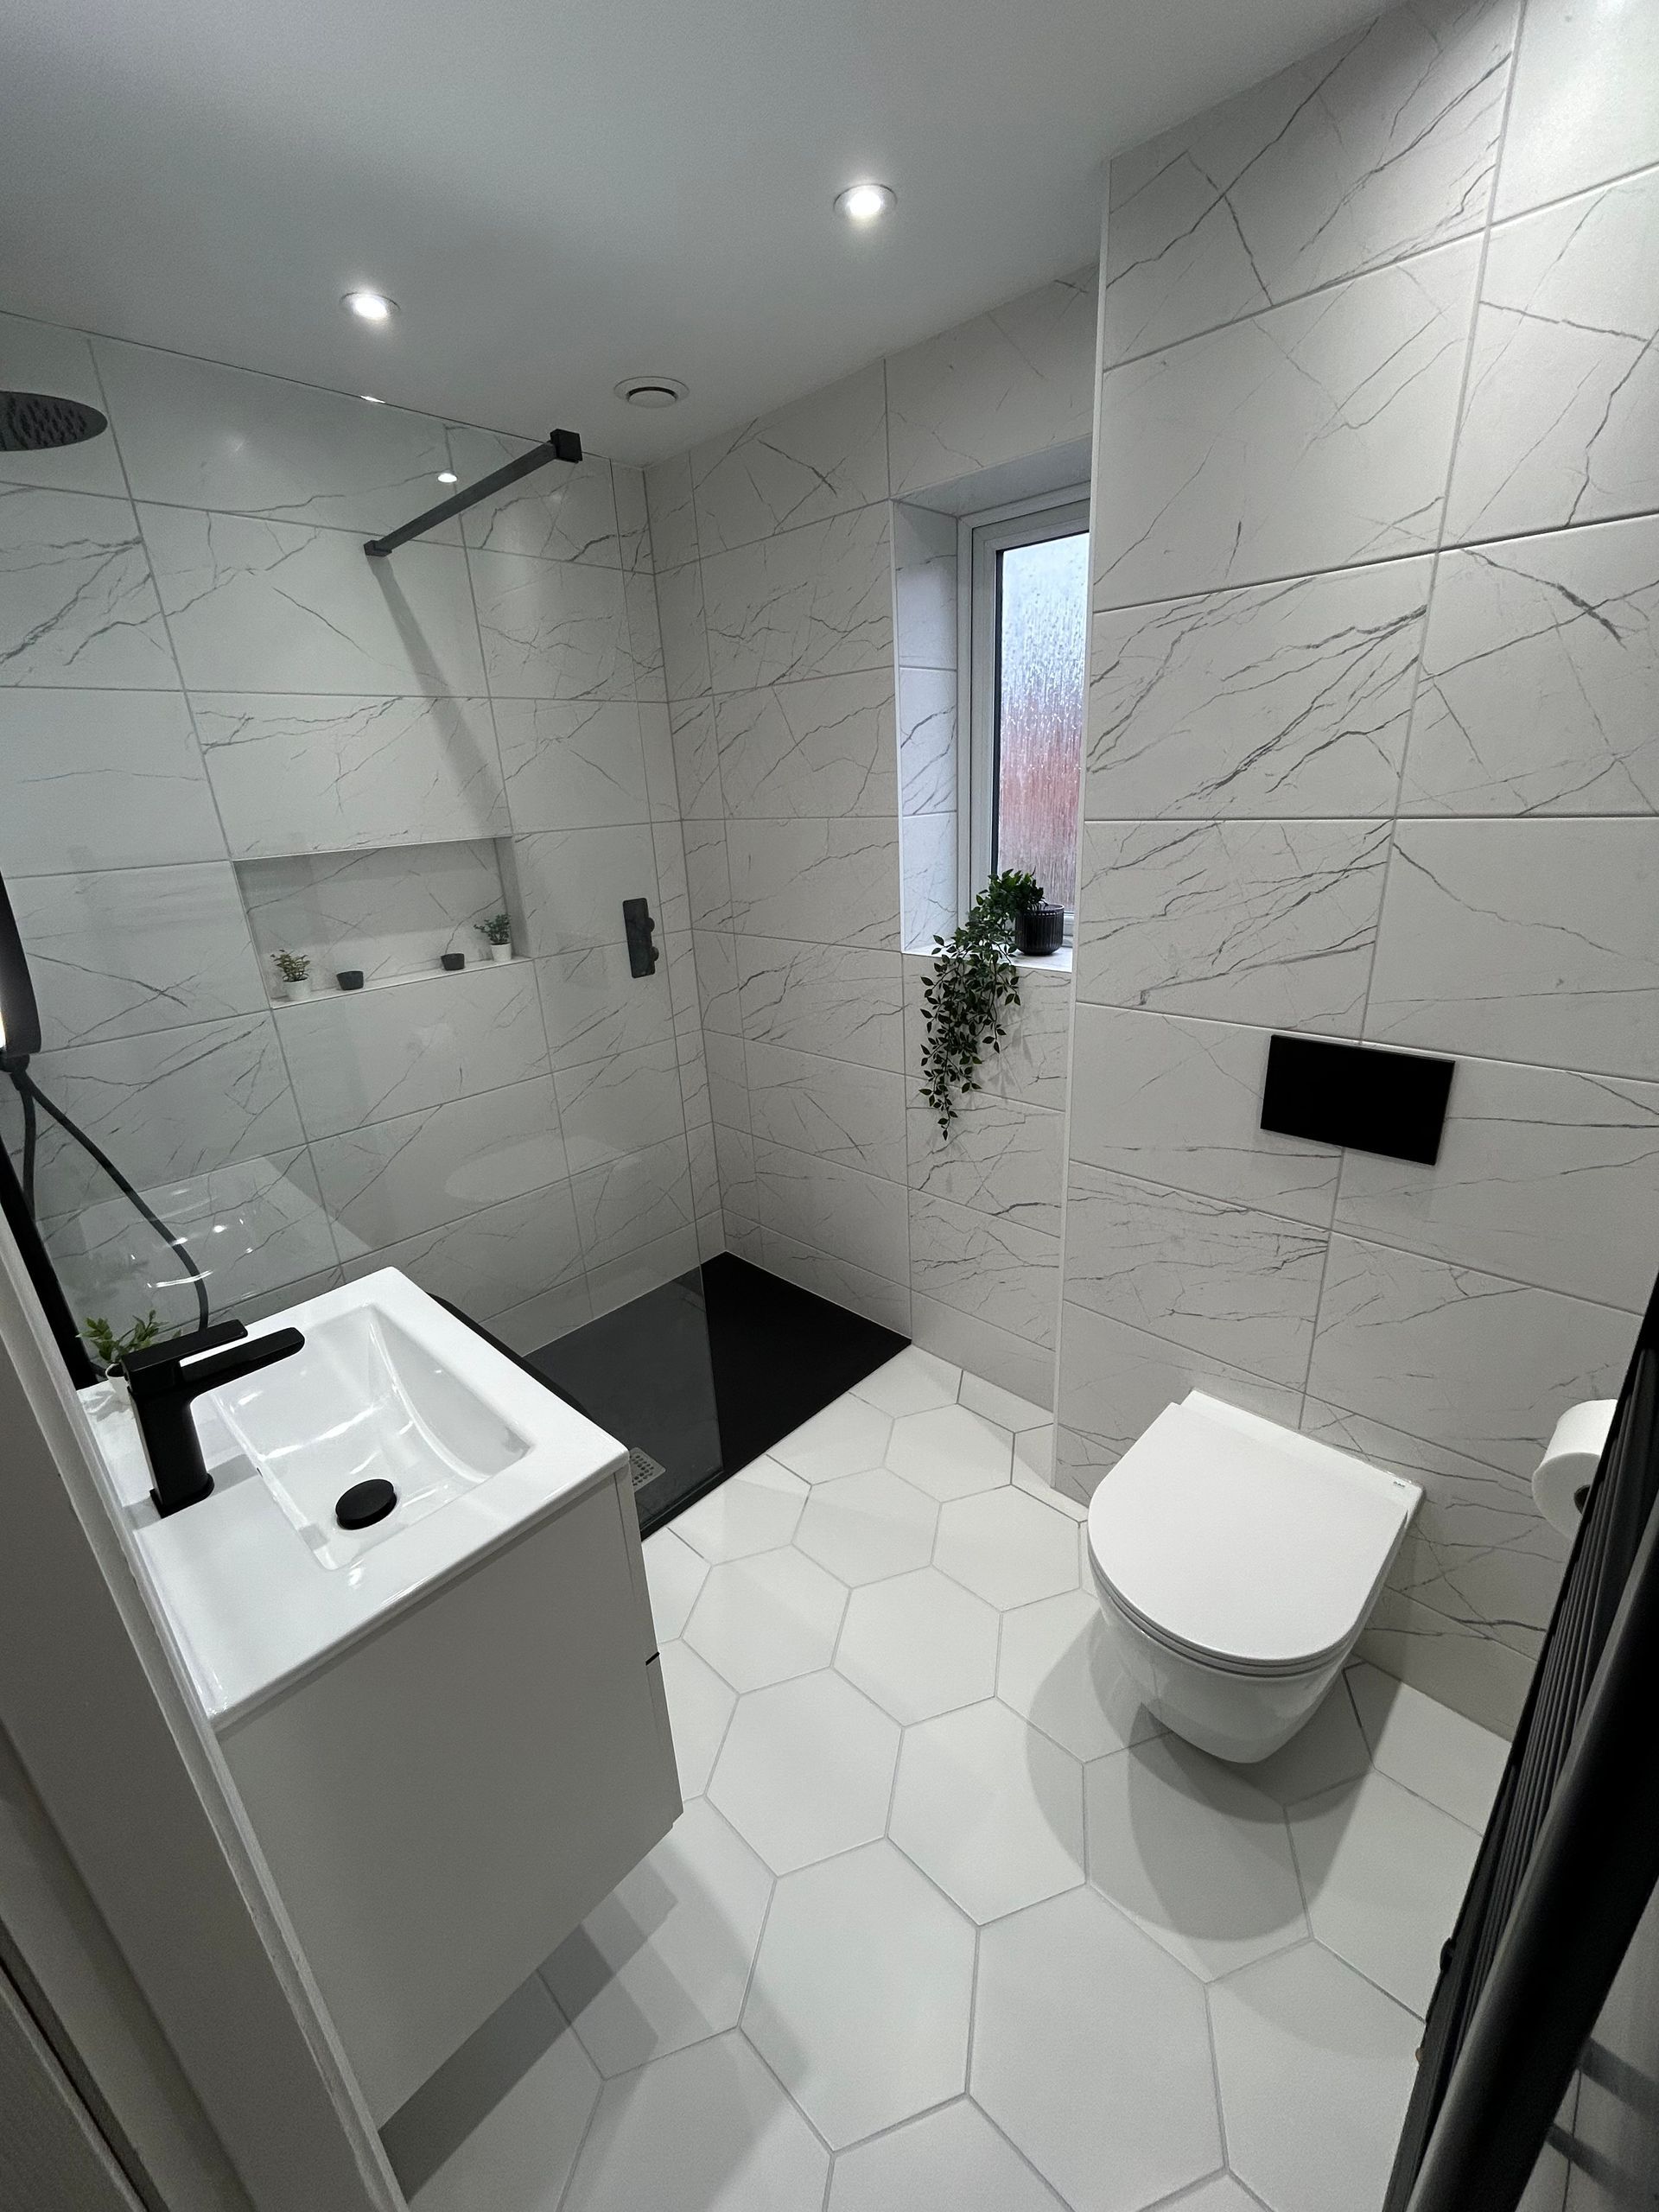 new bathroom installation completed in Rochdale